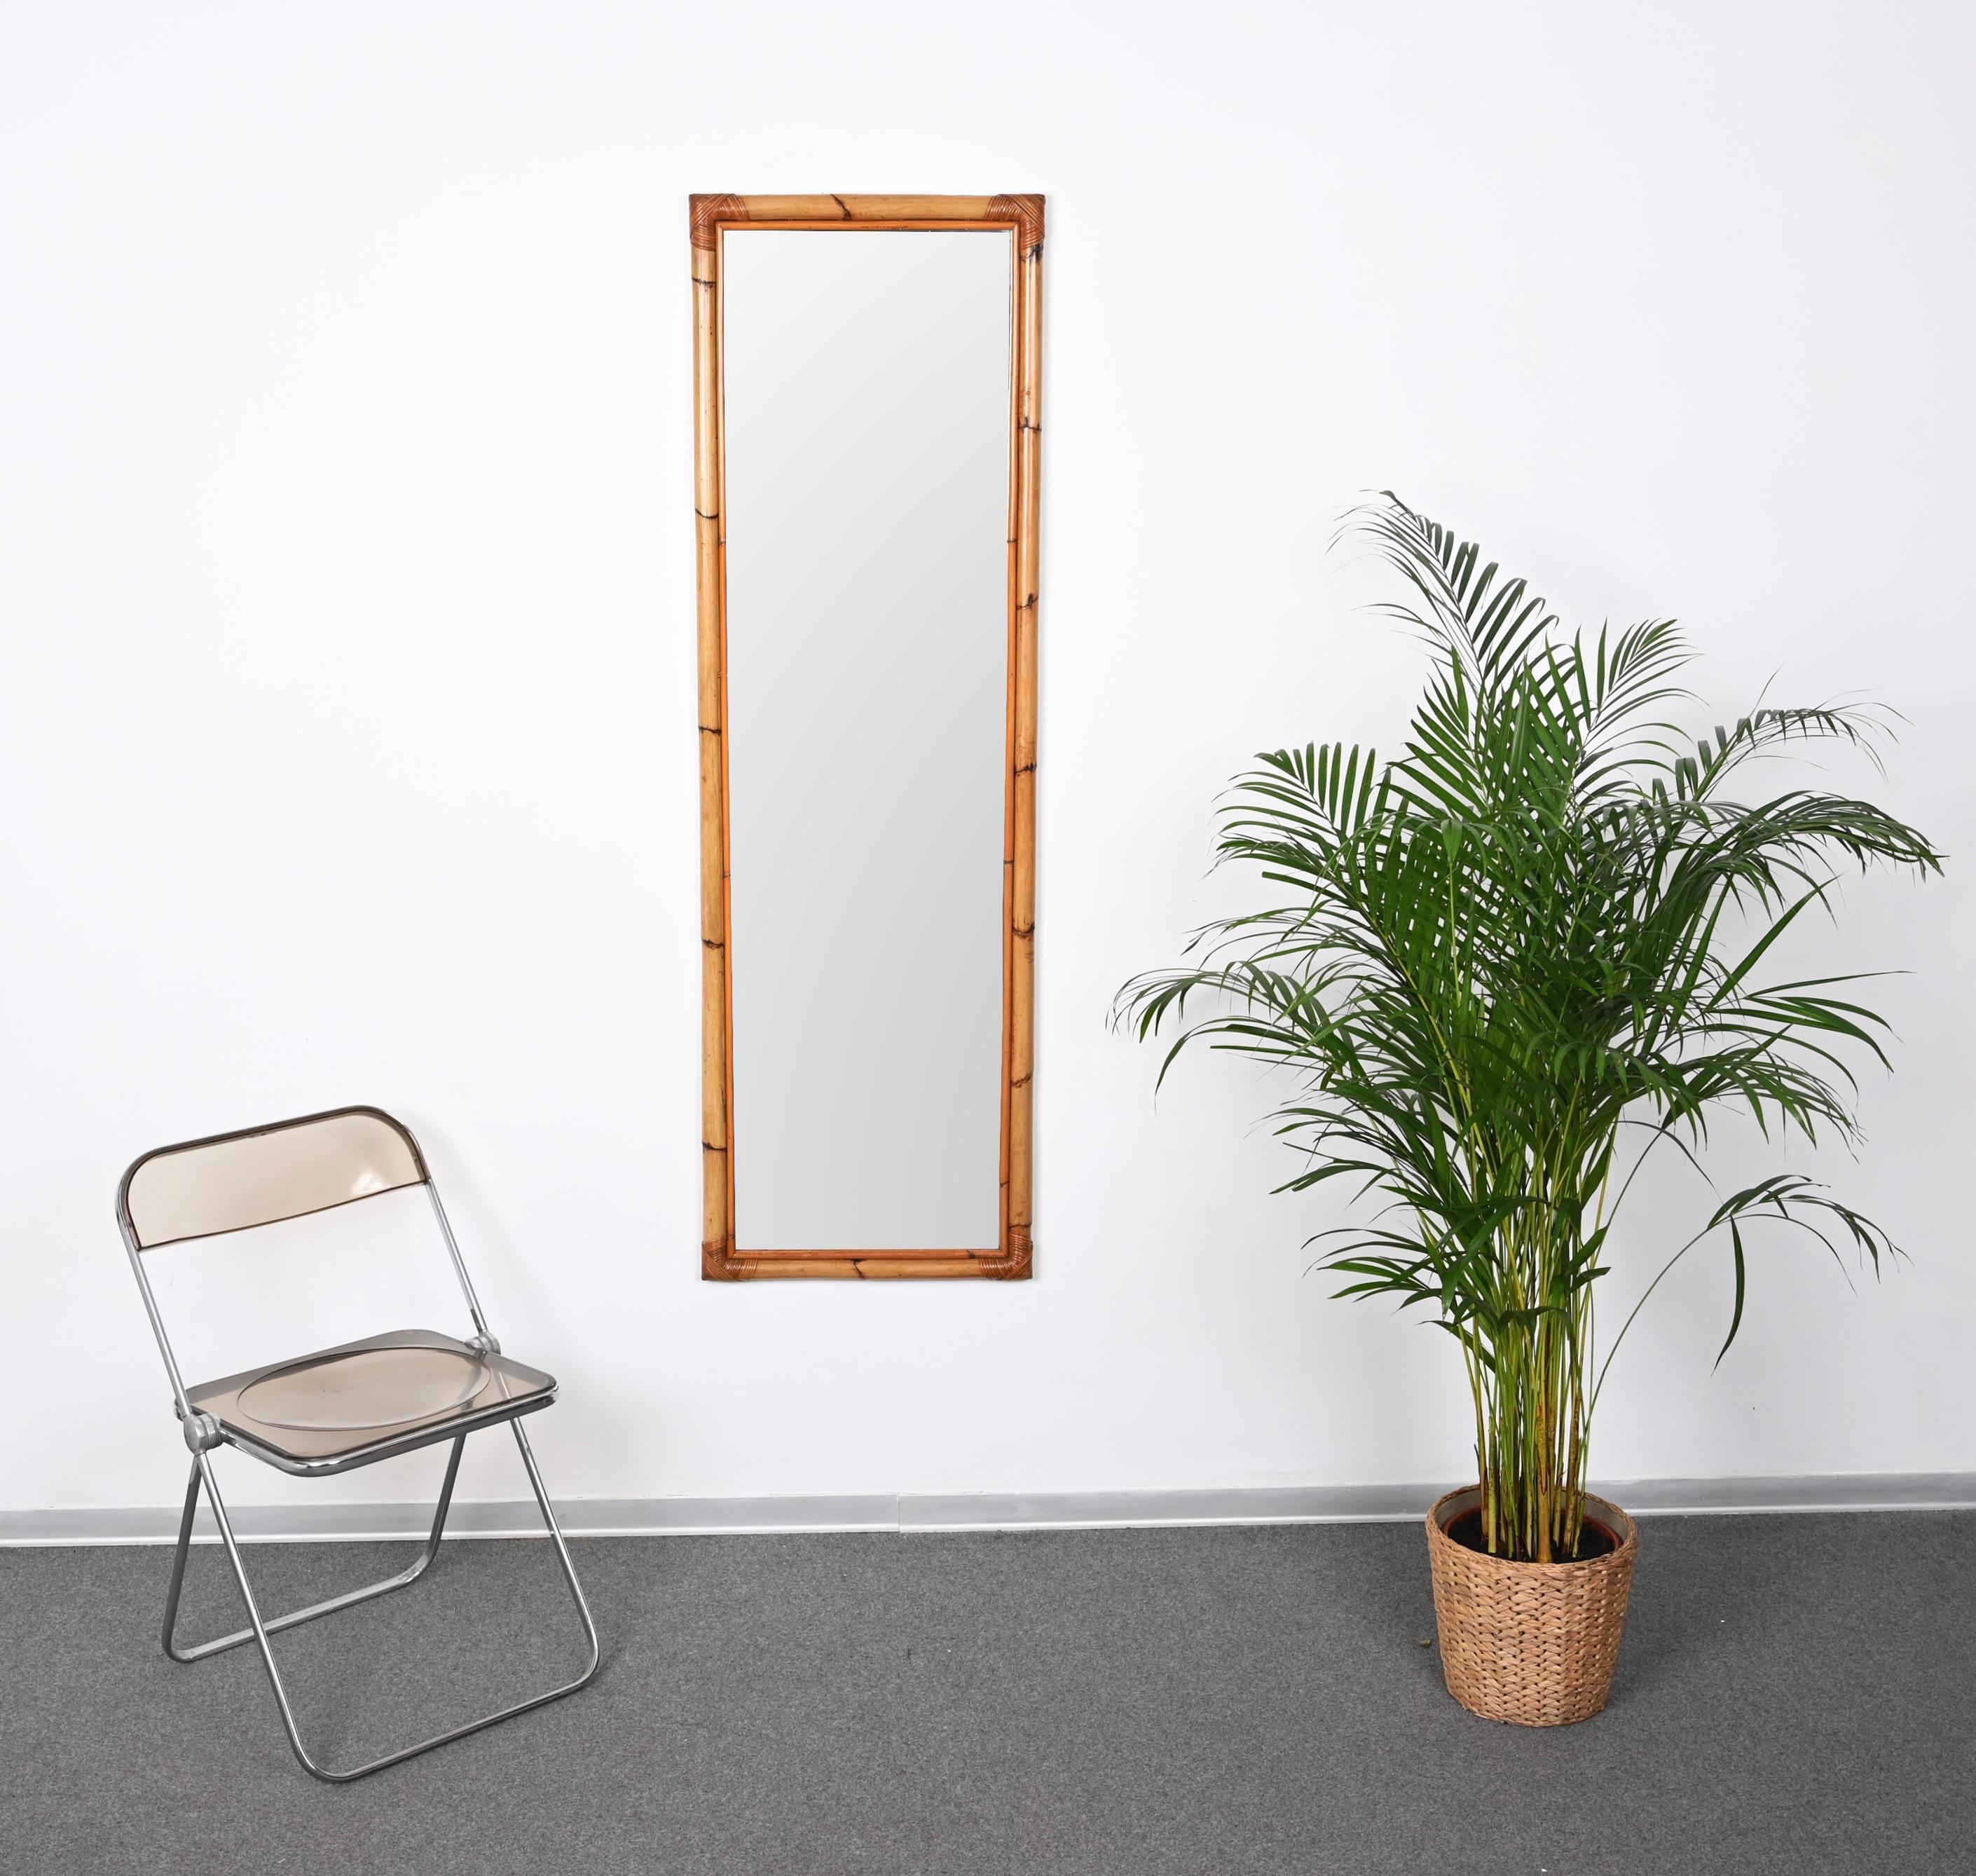 Stunning Mid-Century French Riviera style full length rectangular mirror in bamboo and hand-woven wicker. This gorgeous piece was designed in Italy during the 1970s.

This sturdy mirror has a wonderful double frame in bamboo with the corners